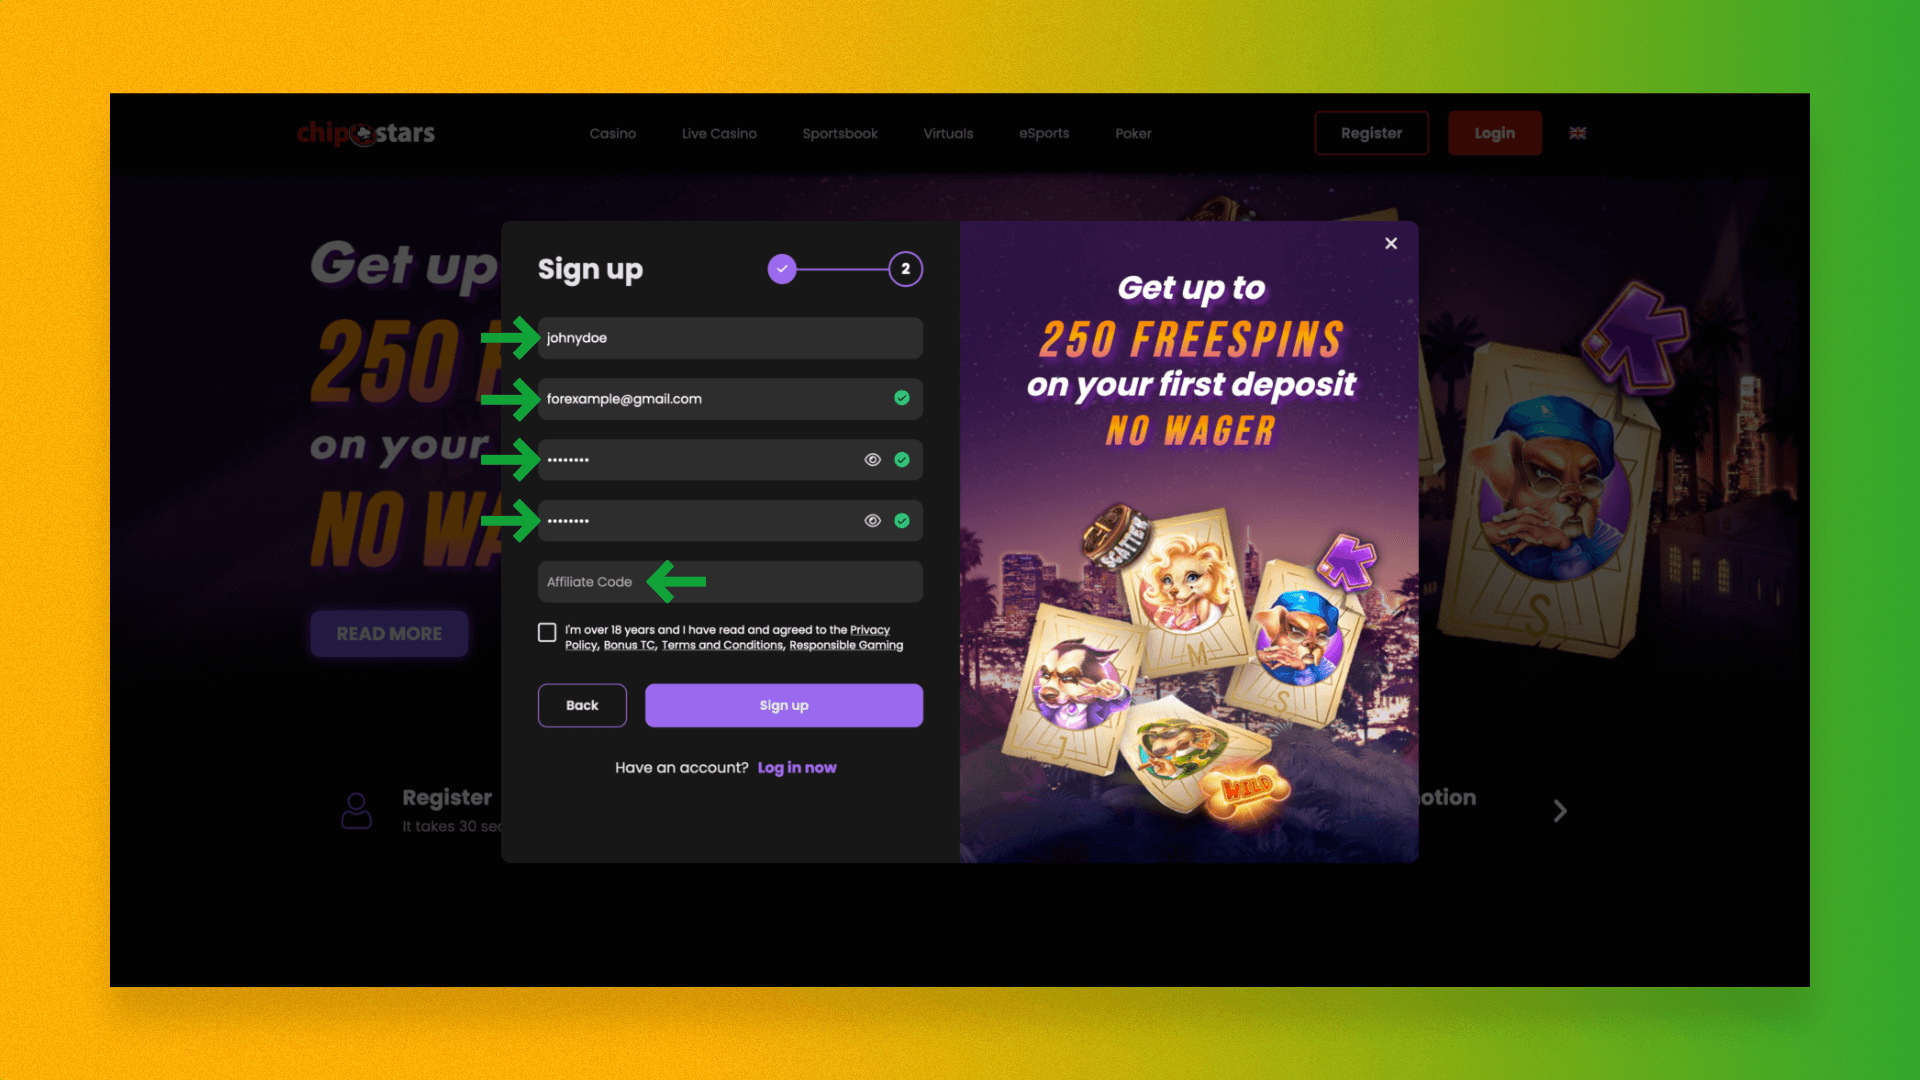 The second step of registration on the Chipstars website